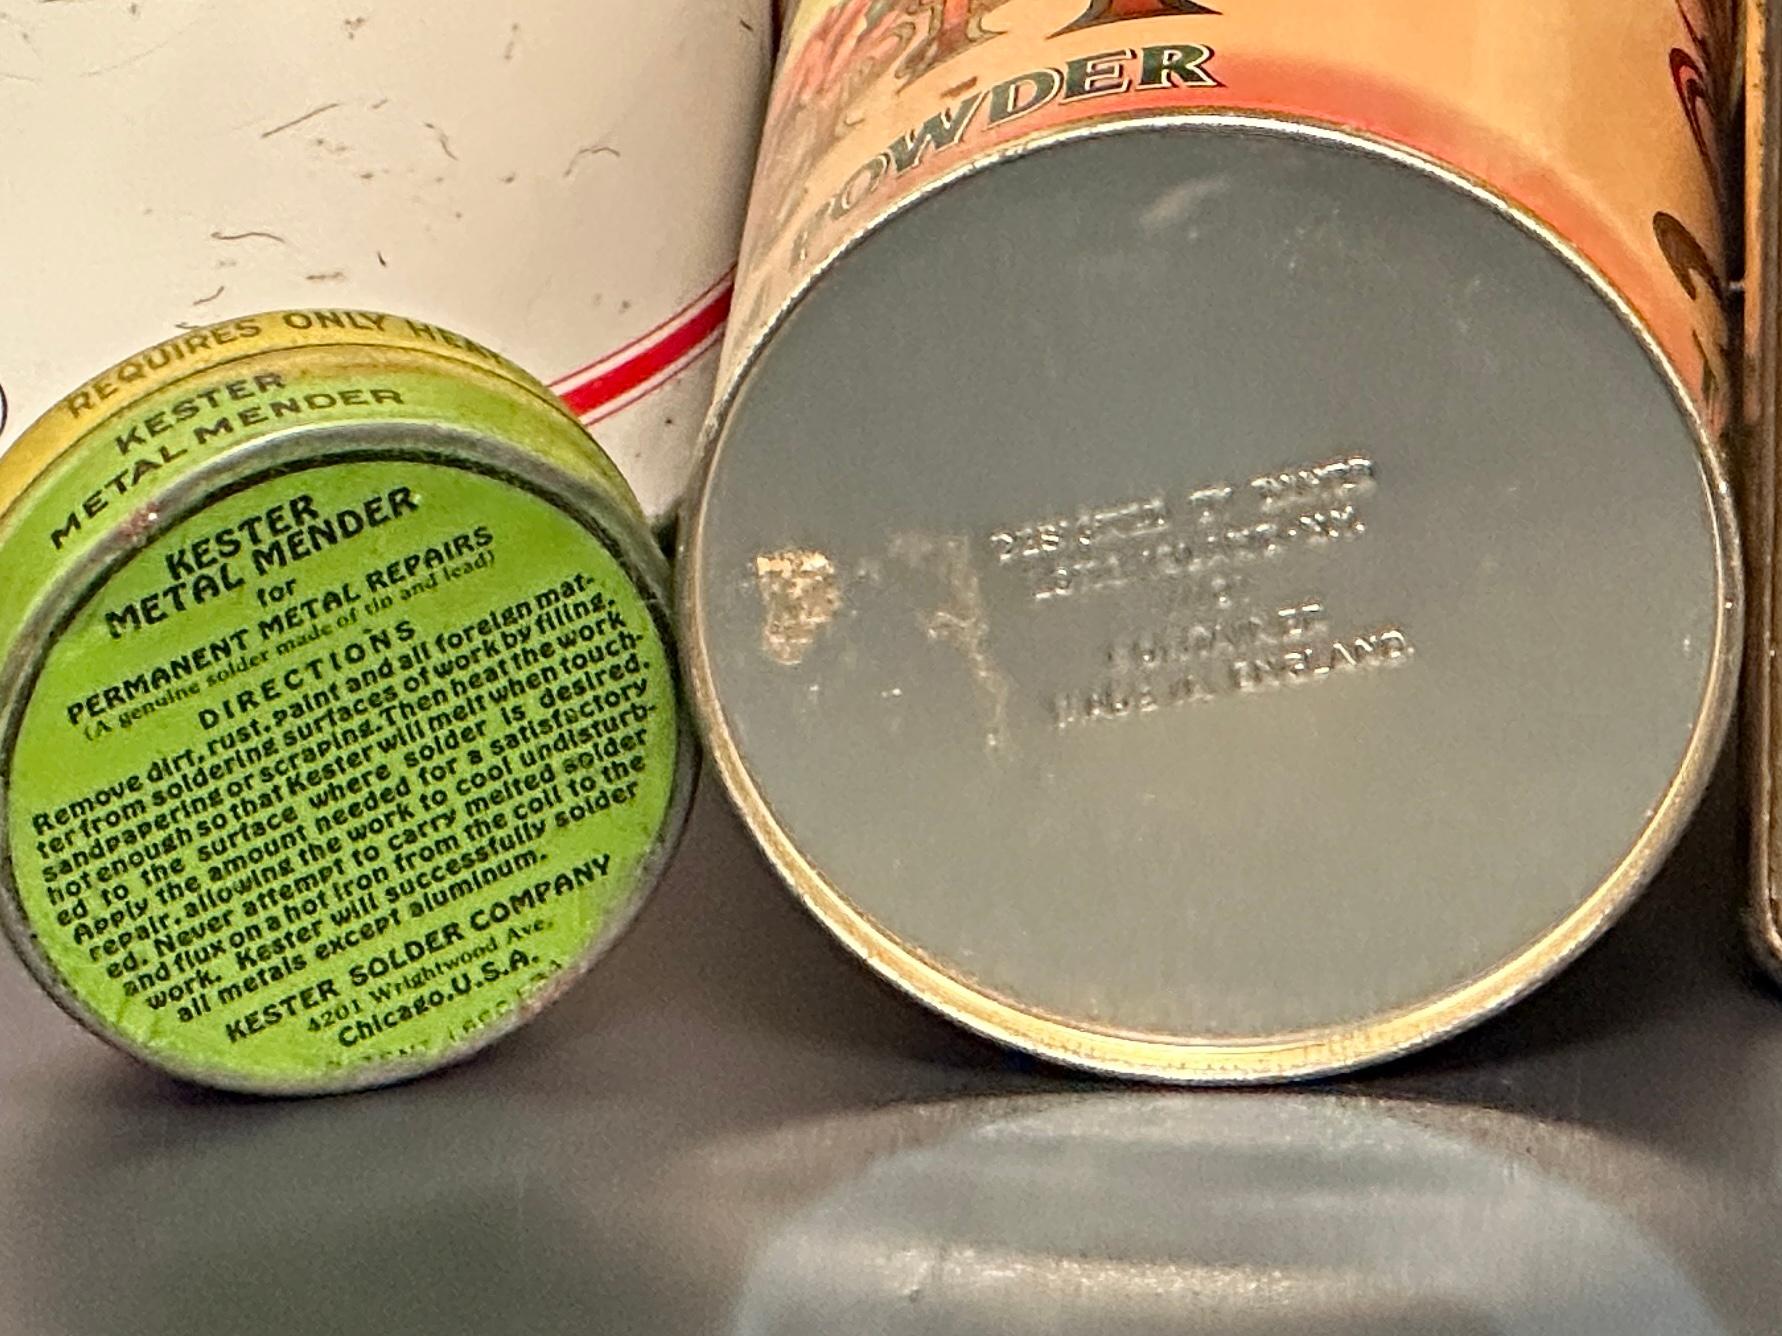 Collection of Vintage Tins